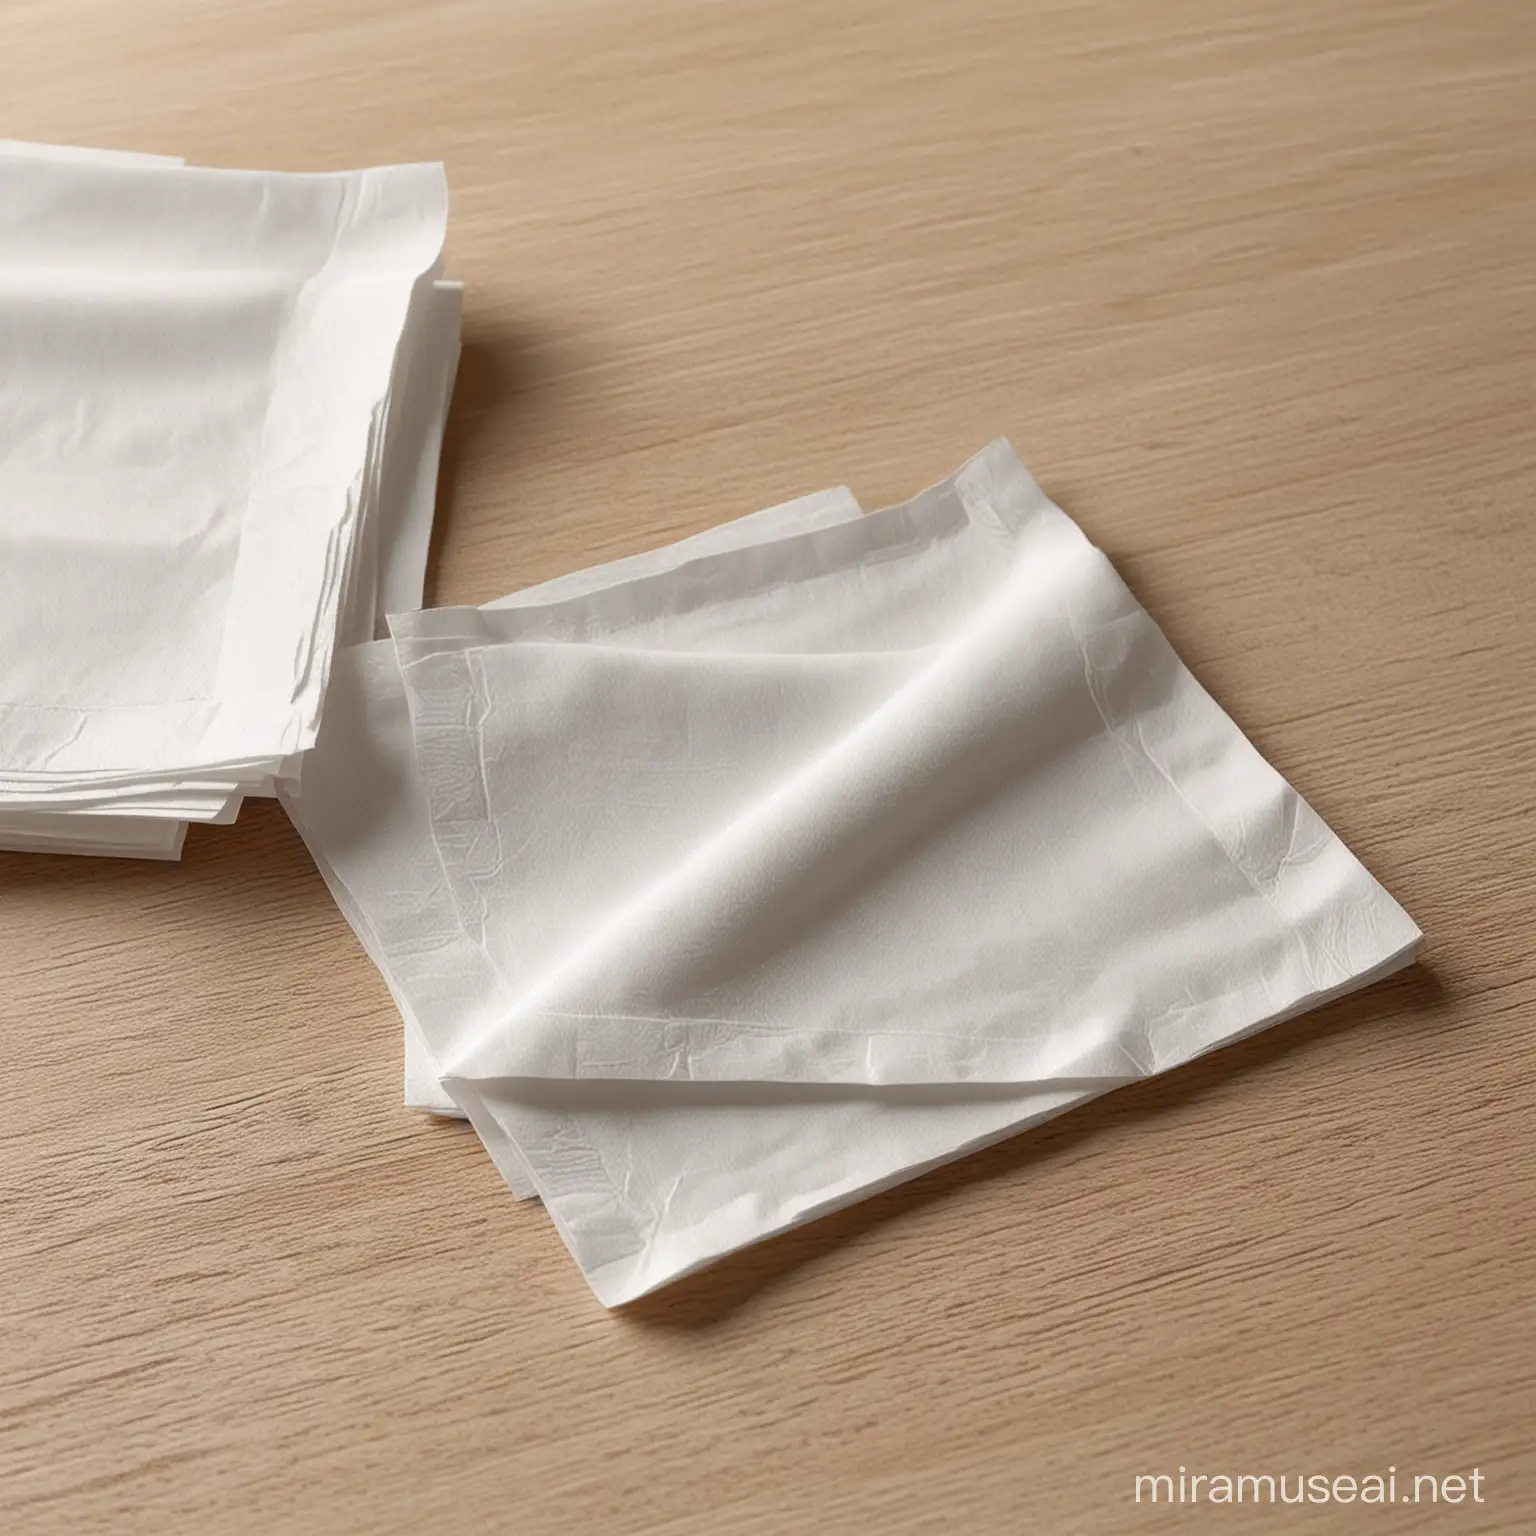 create realistic mockups of 3-ply paper white napkins lying on a table in interior 